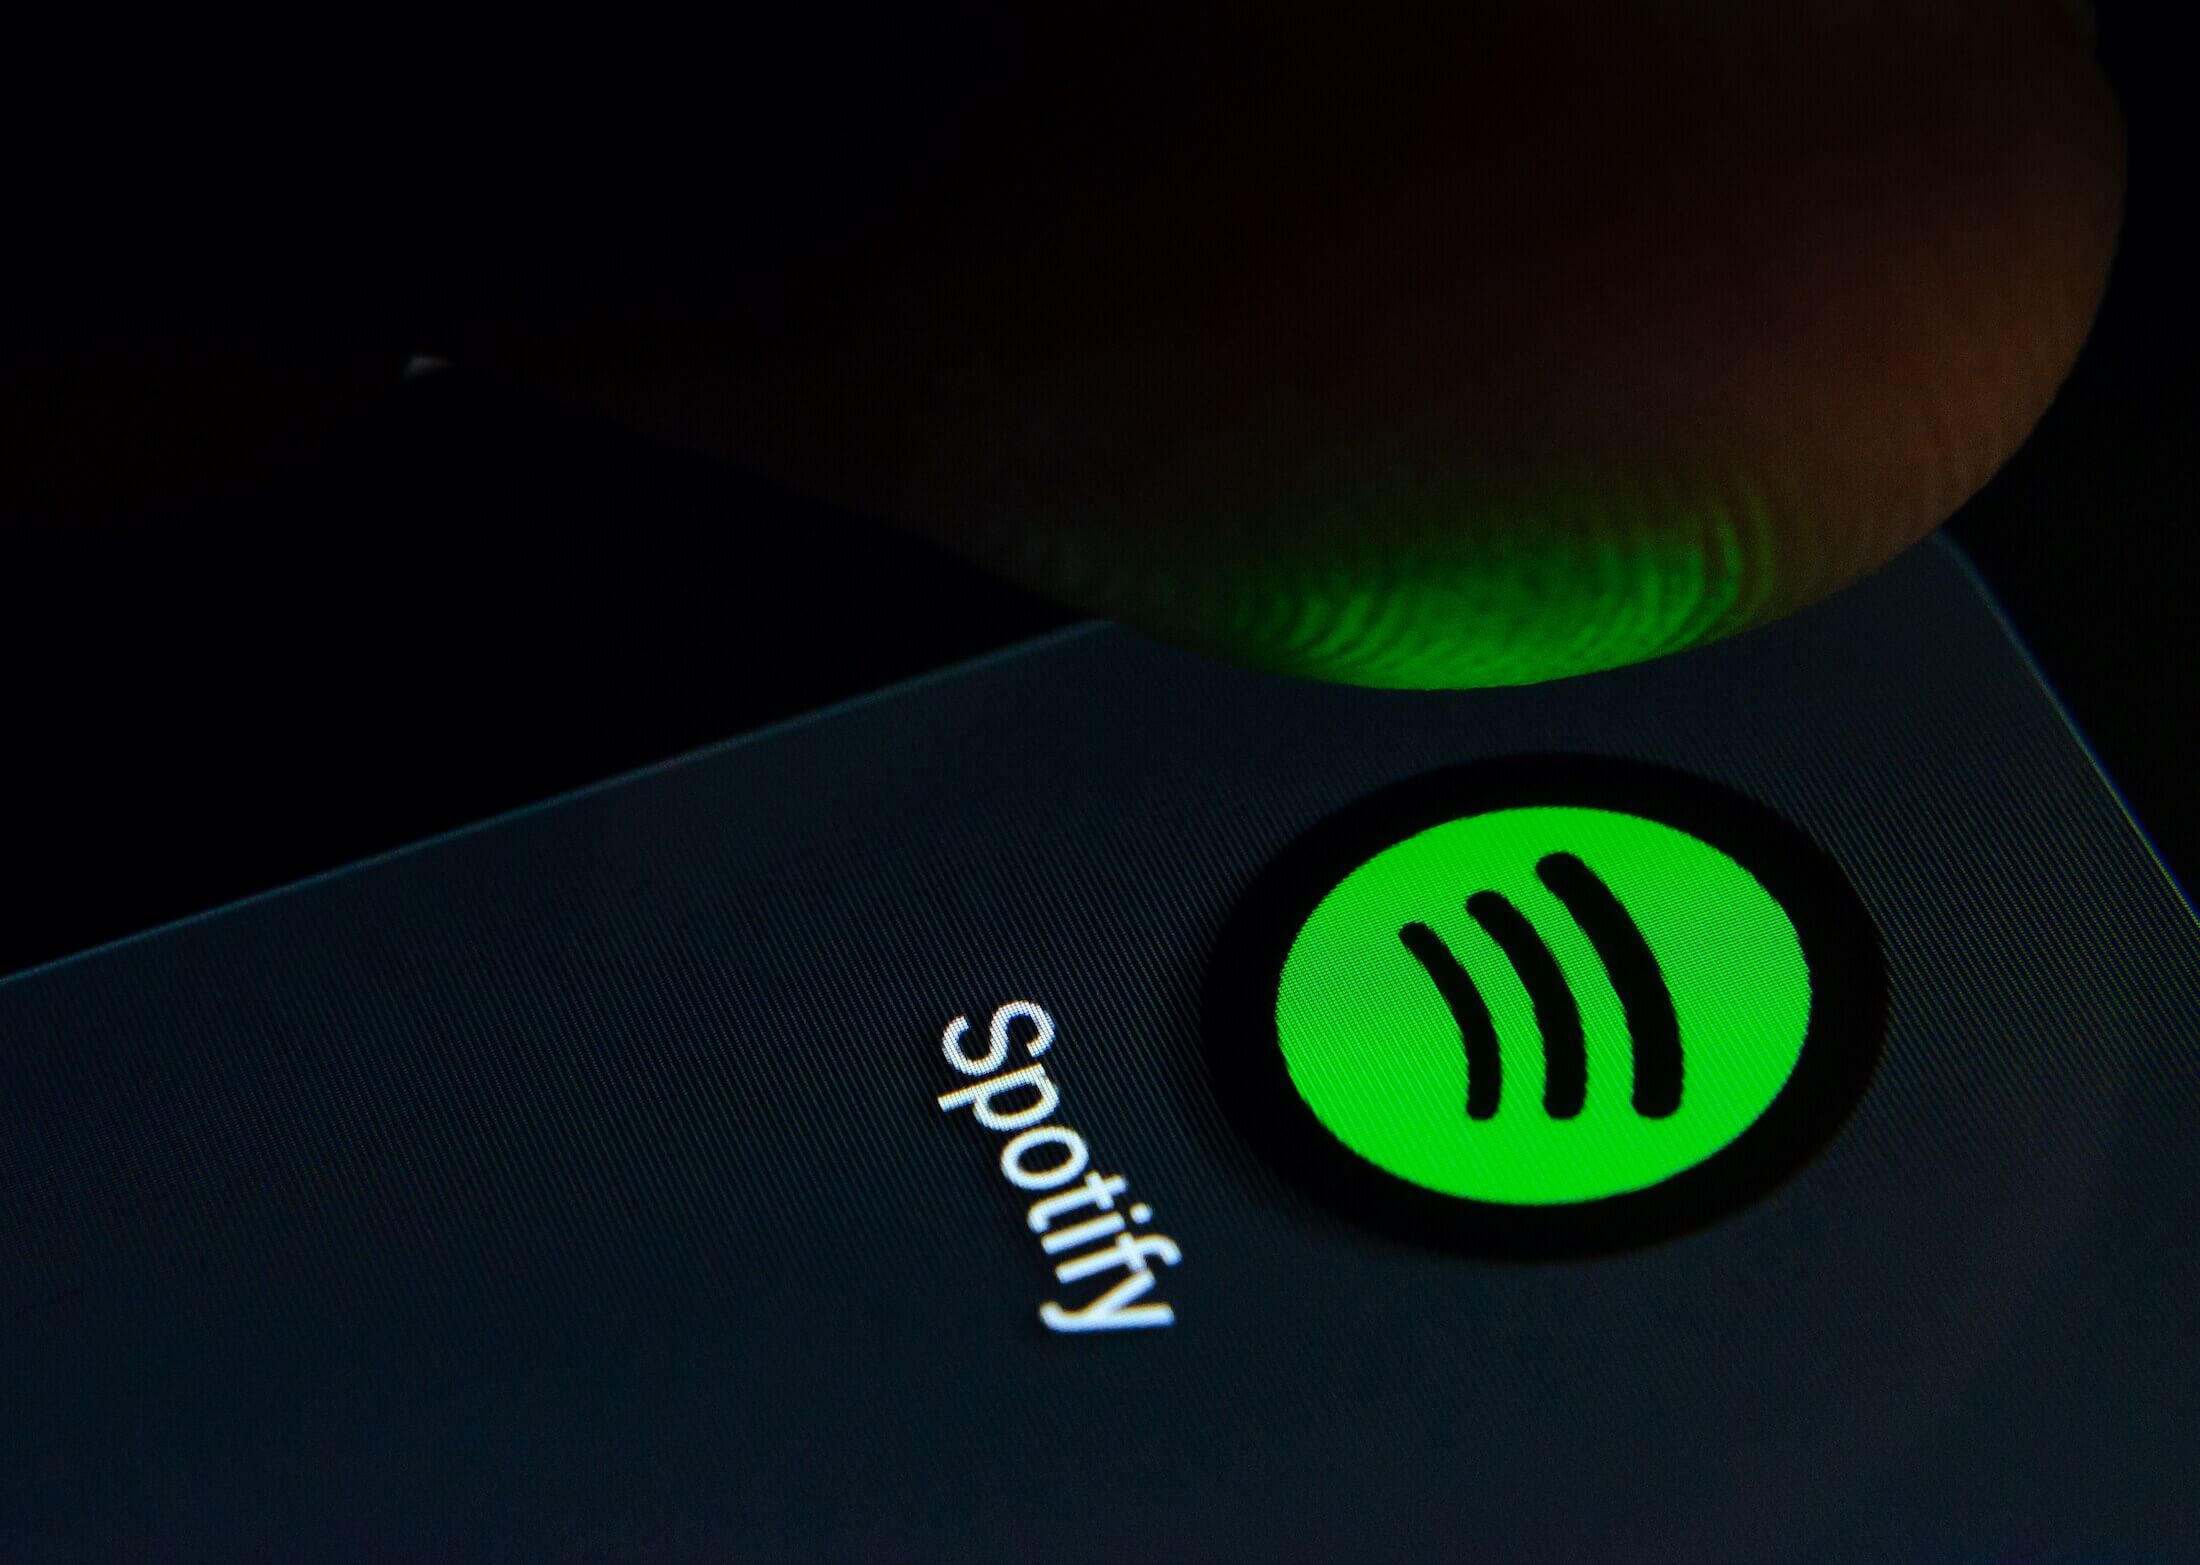 A new music discovery feature for Spotify called 'Tastebuds' was recently uncovered